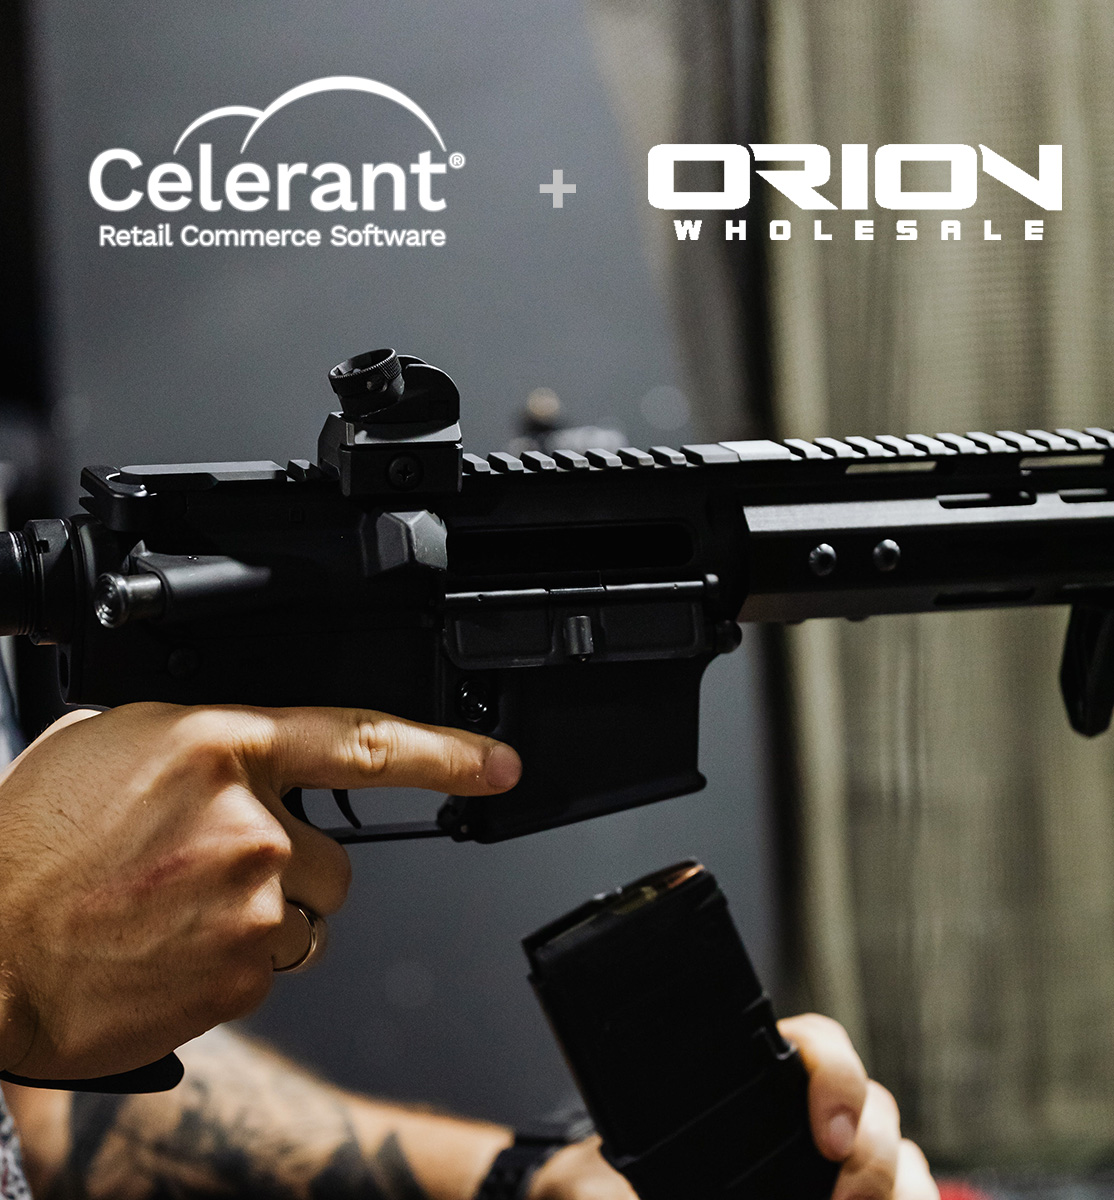 Celerant and Orion Wholesale